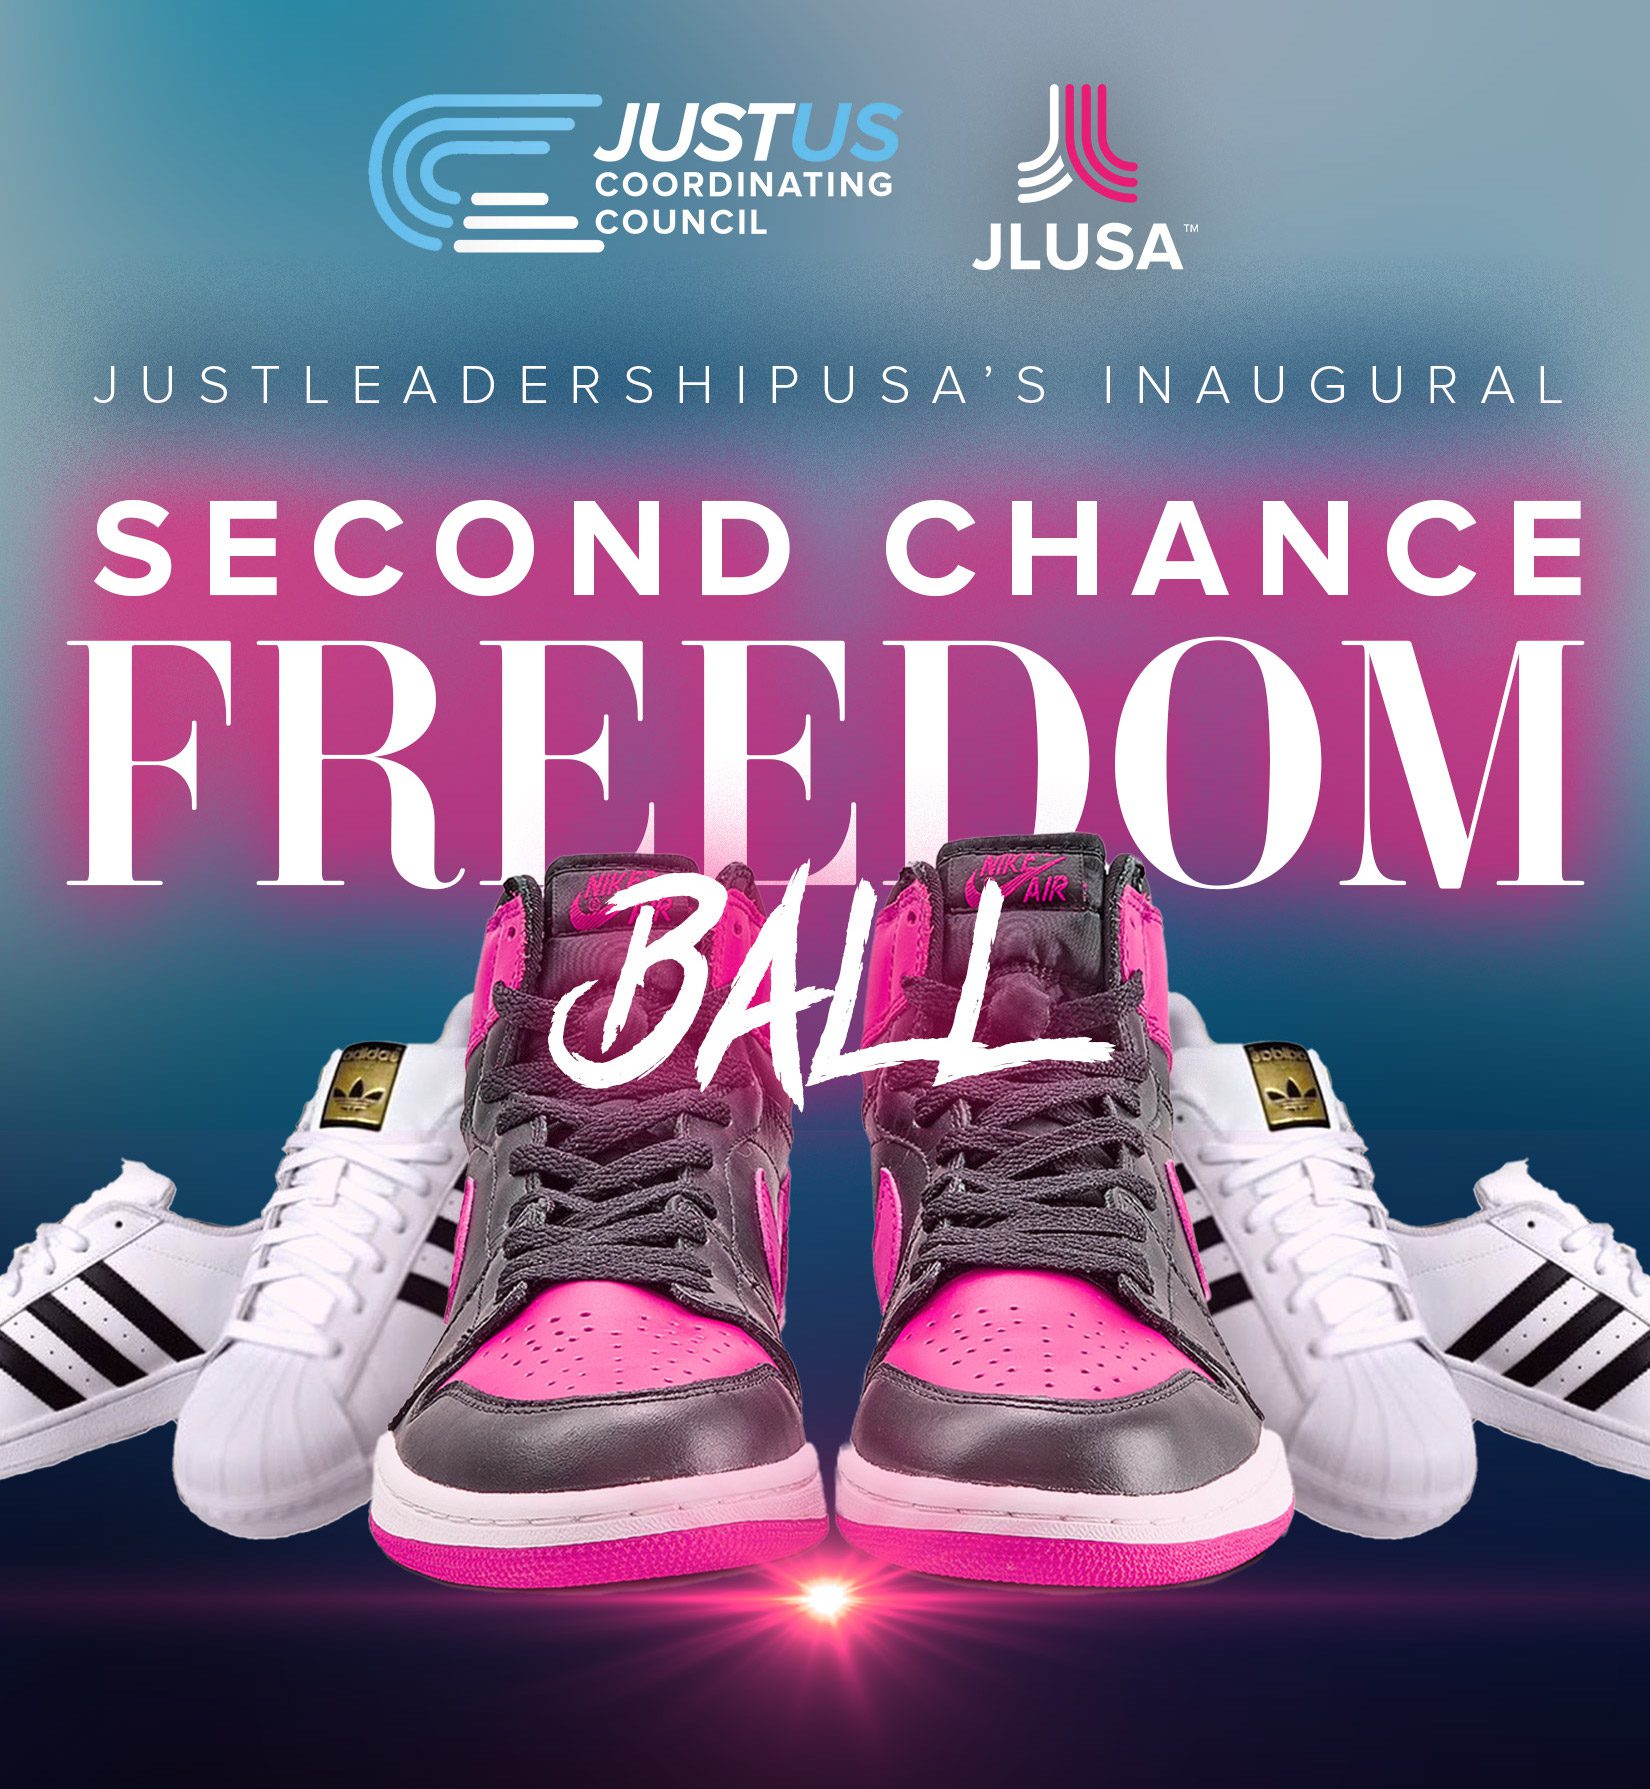 Inaugural Second Chance Freedom Ball